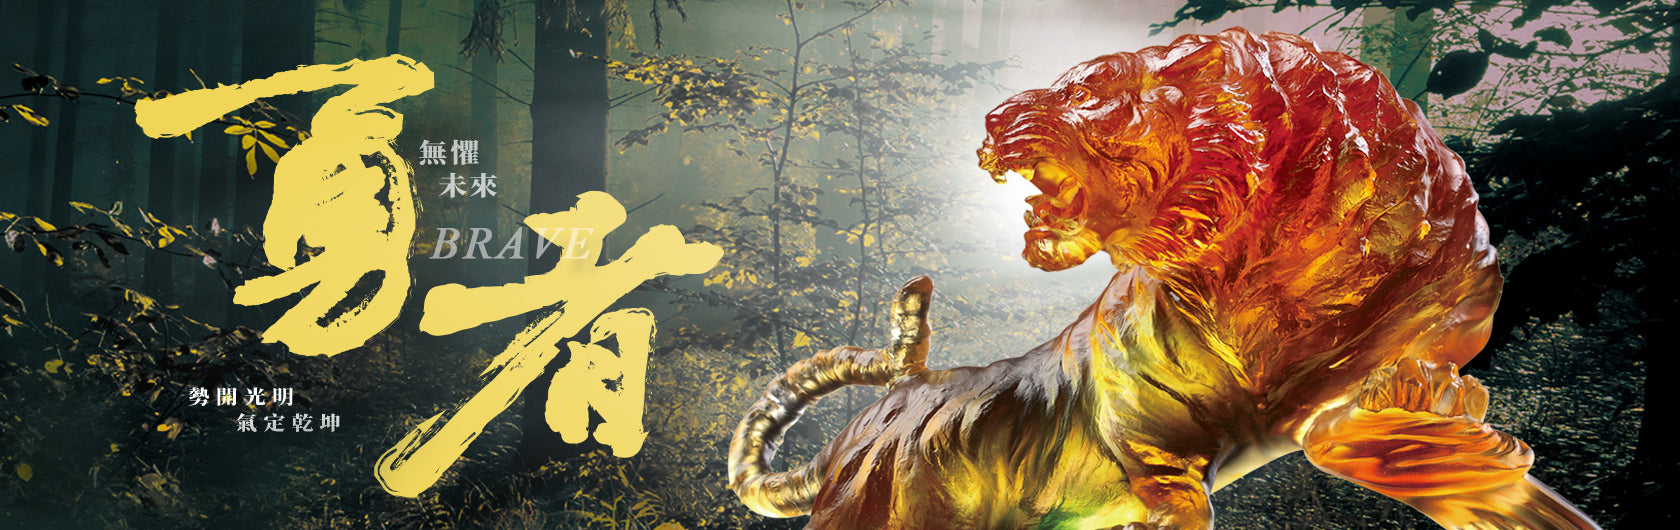 Year of the Tiger | Chinese Zodiac Artwork